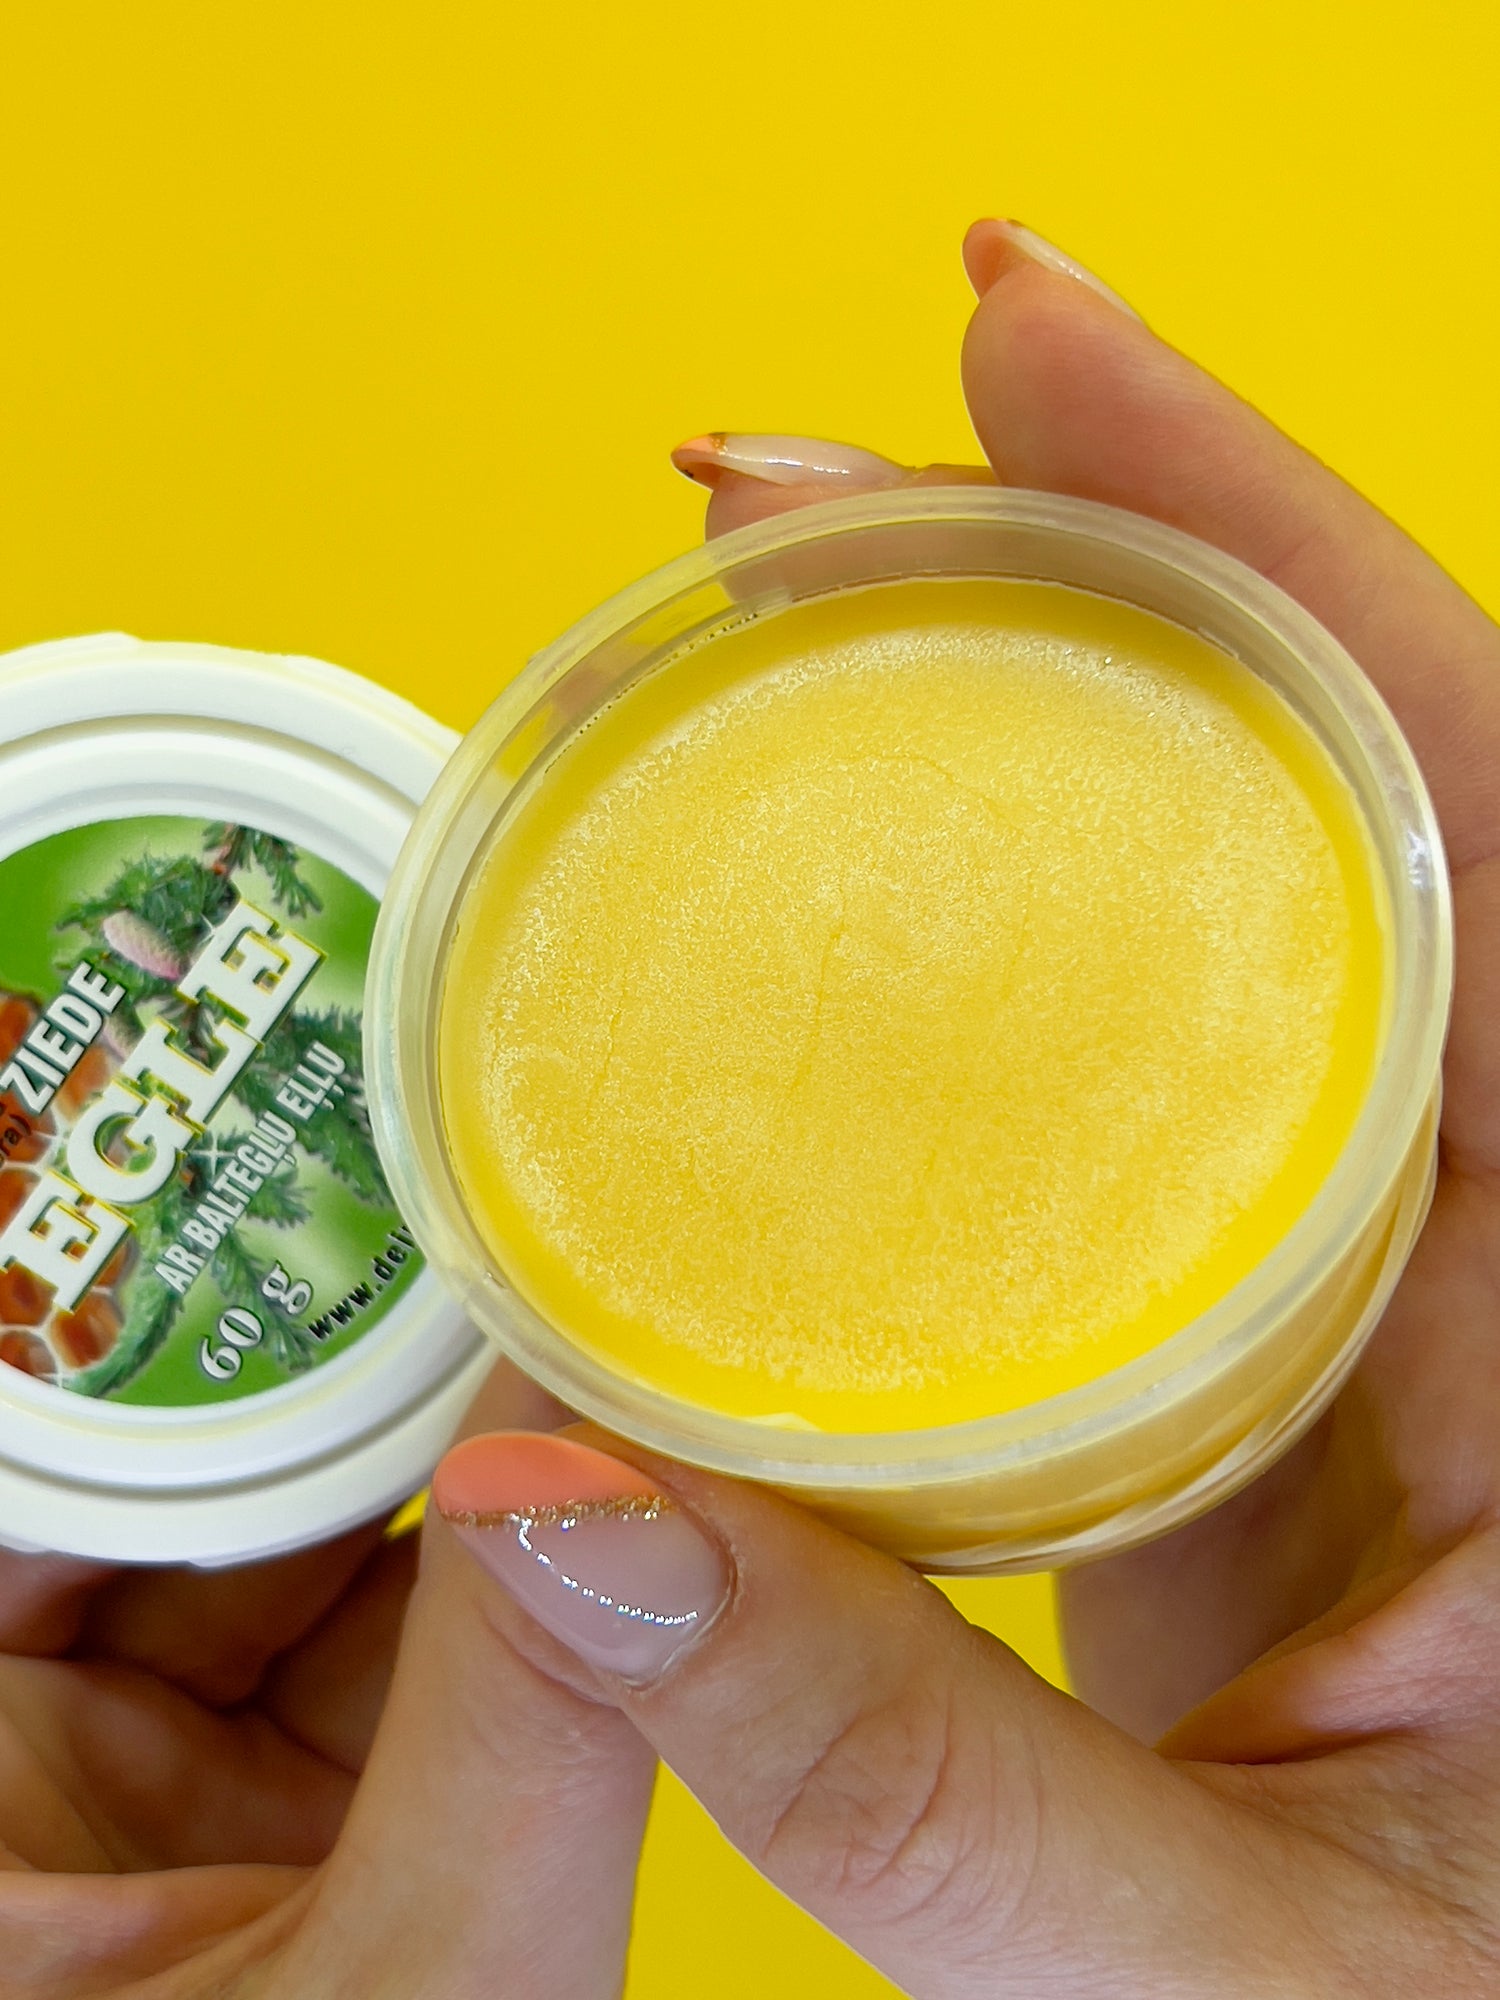 Beeswax ointment